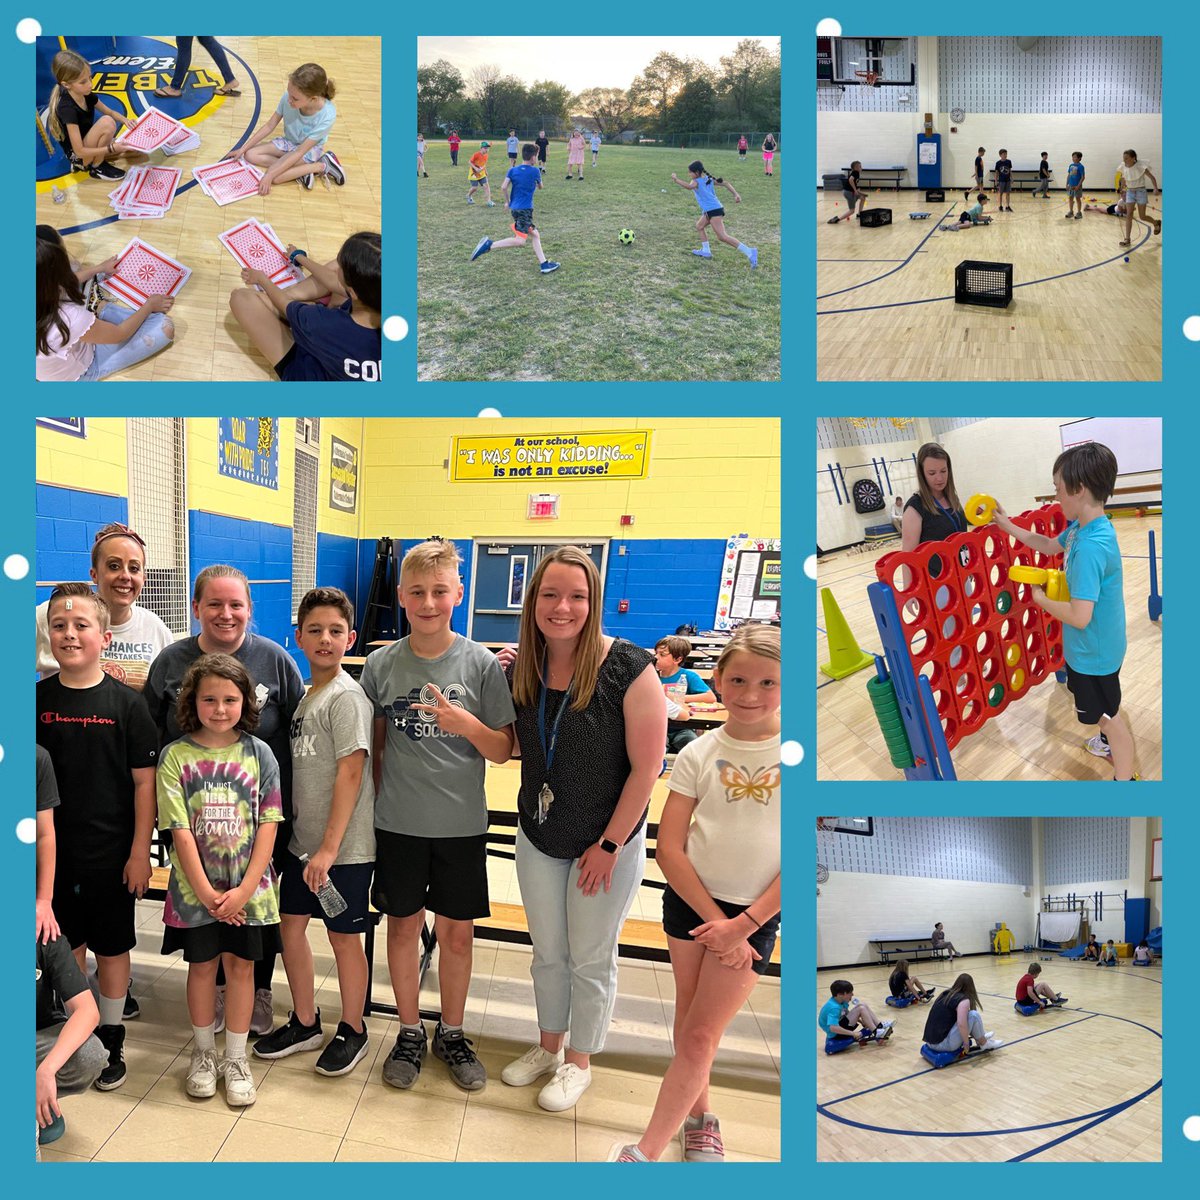 It was a JUMBO night of fun at giant board game 4th grade fun night tonight! Hungry hungry hippos, soccer, giant cards, and more! Great job Tabernacle HSA! #OneTownOneTEAm #tigerstrong @Tabschools @tabernaclehsa